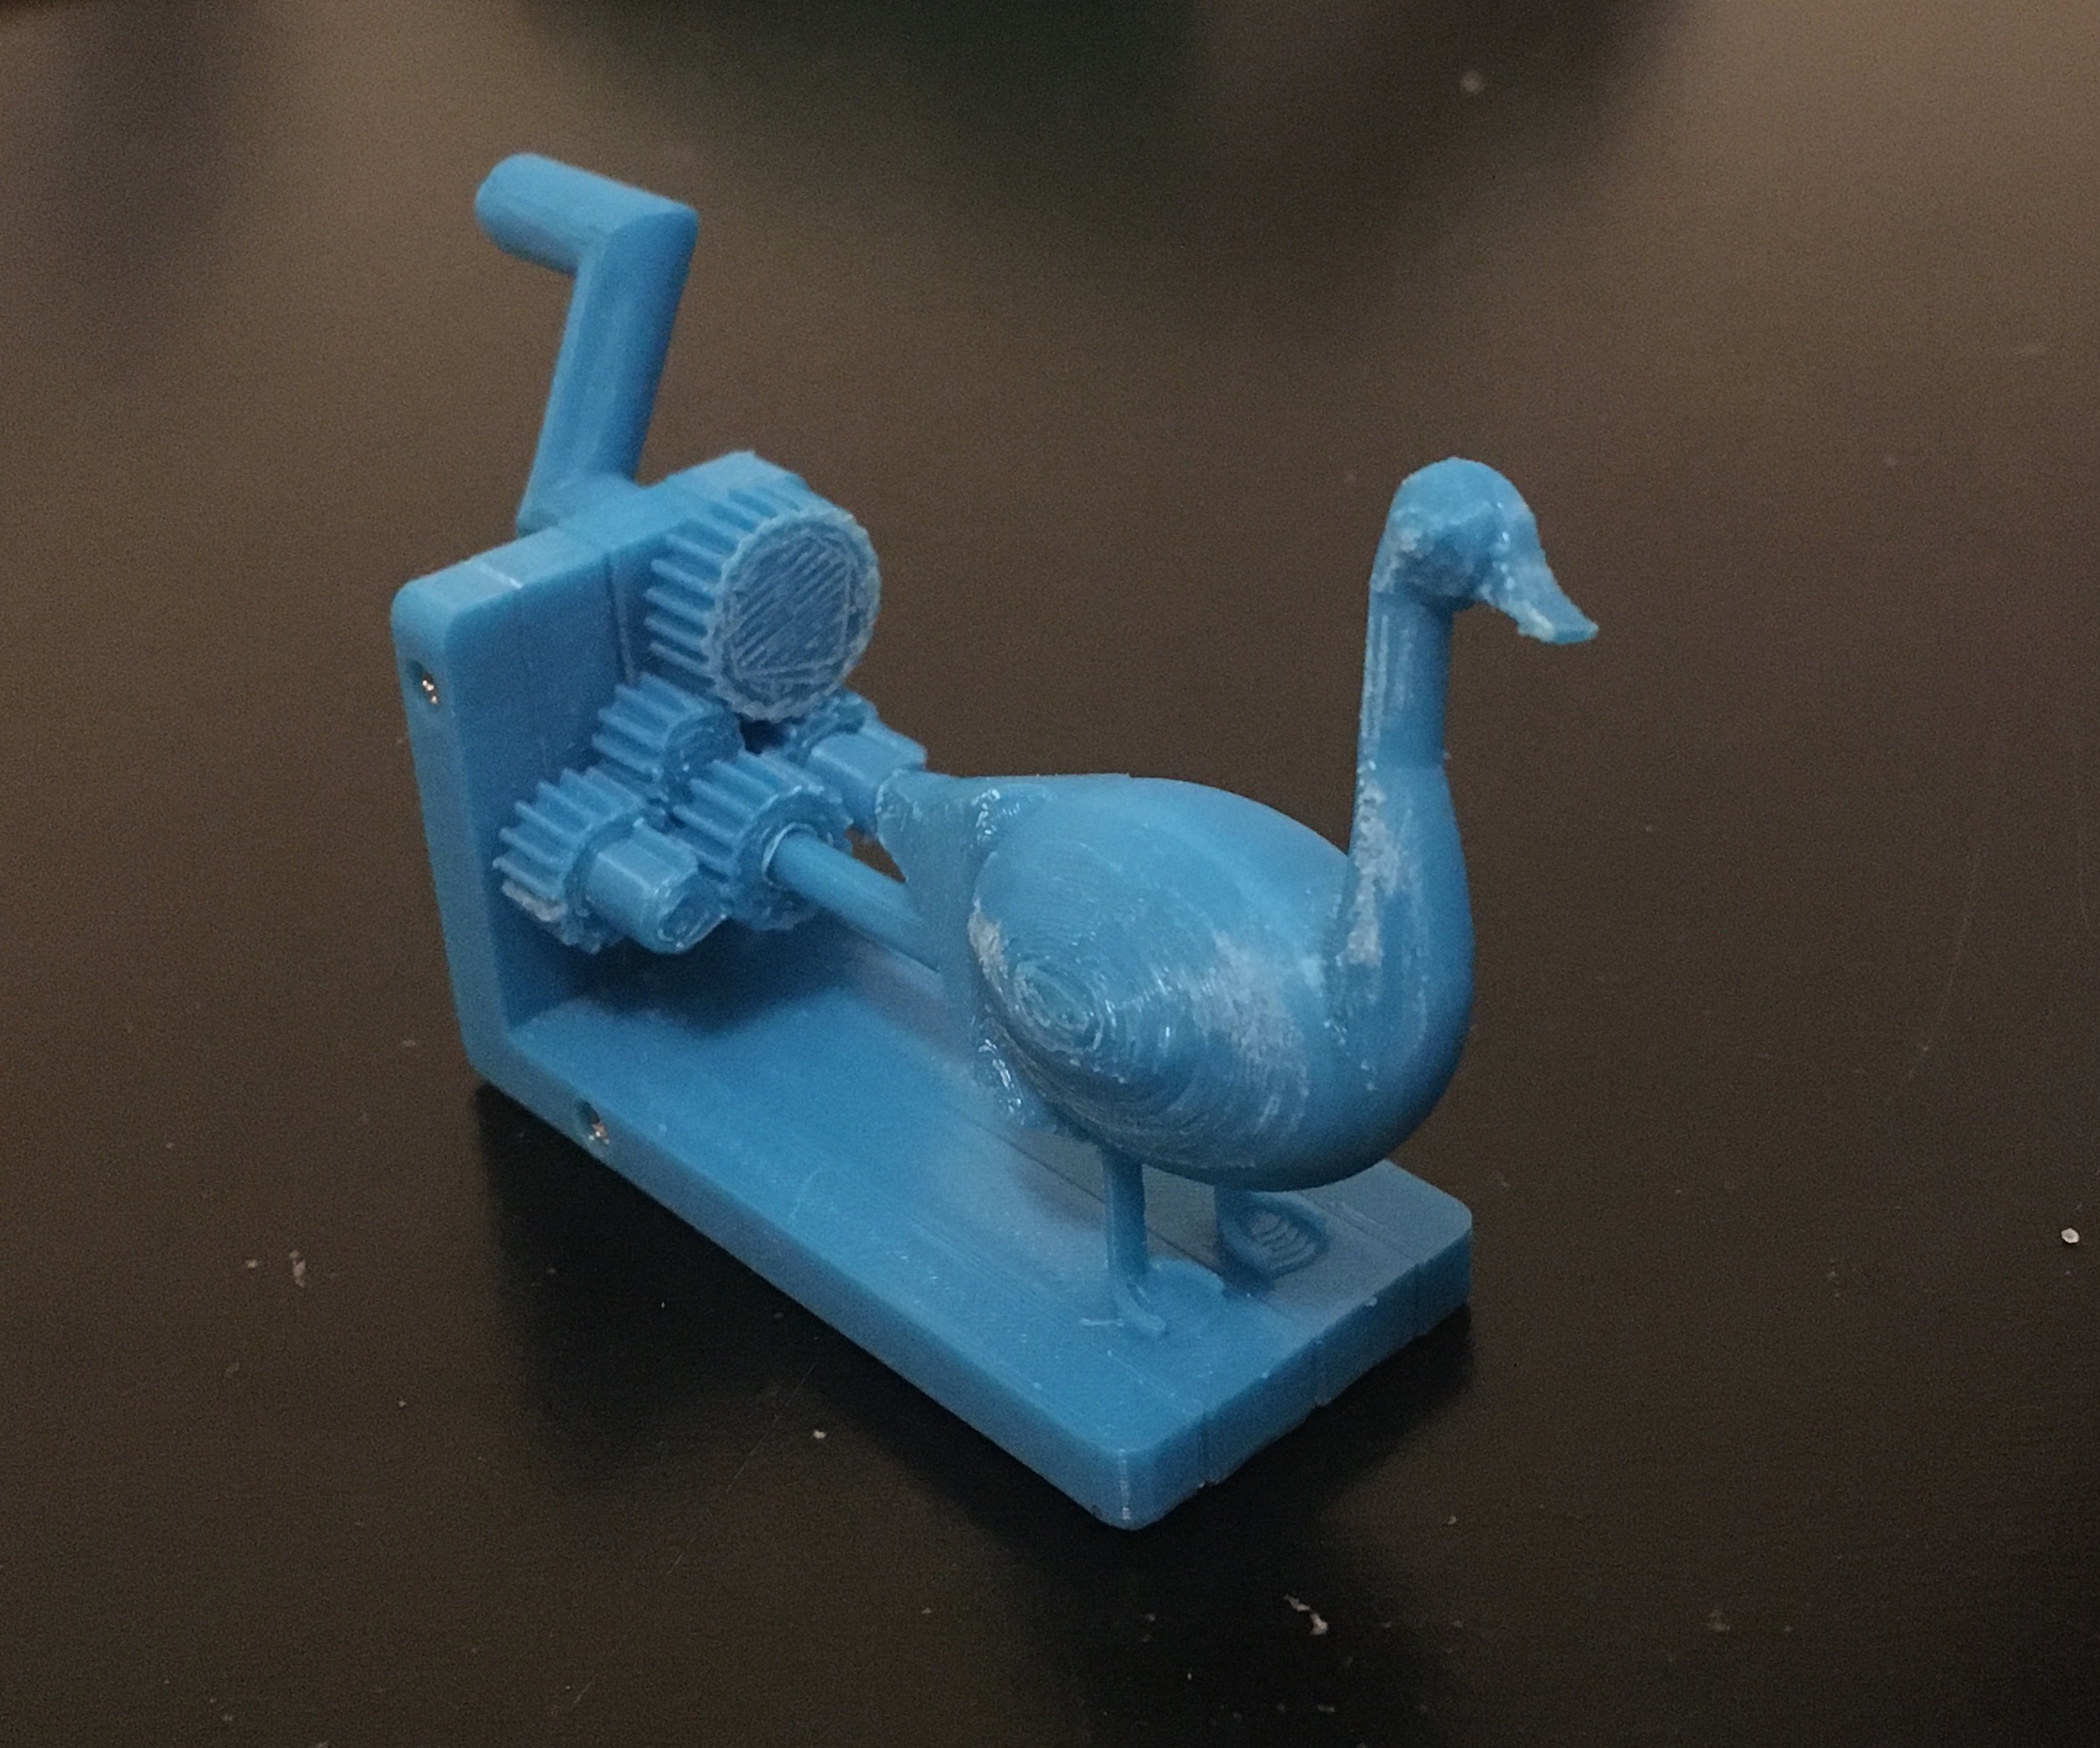 Completed Goose Automaton